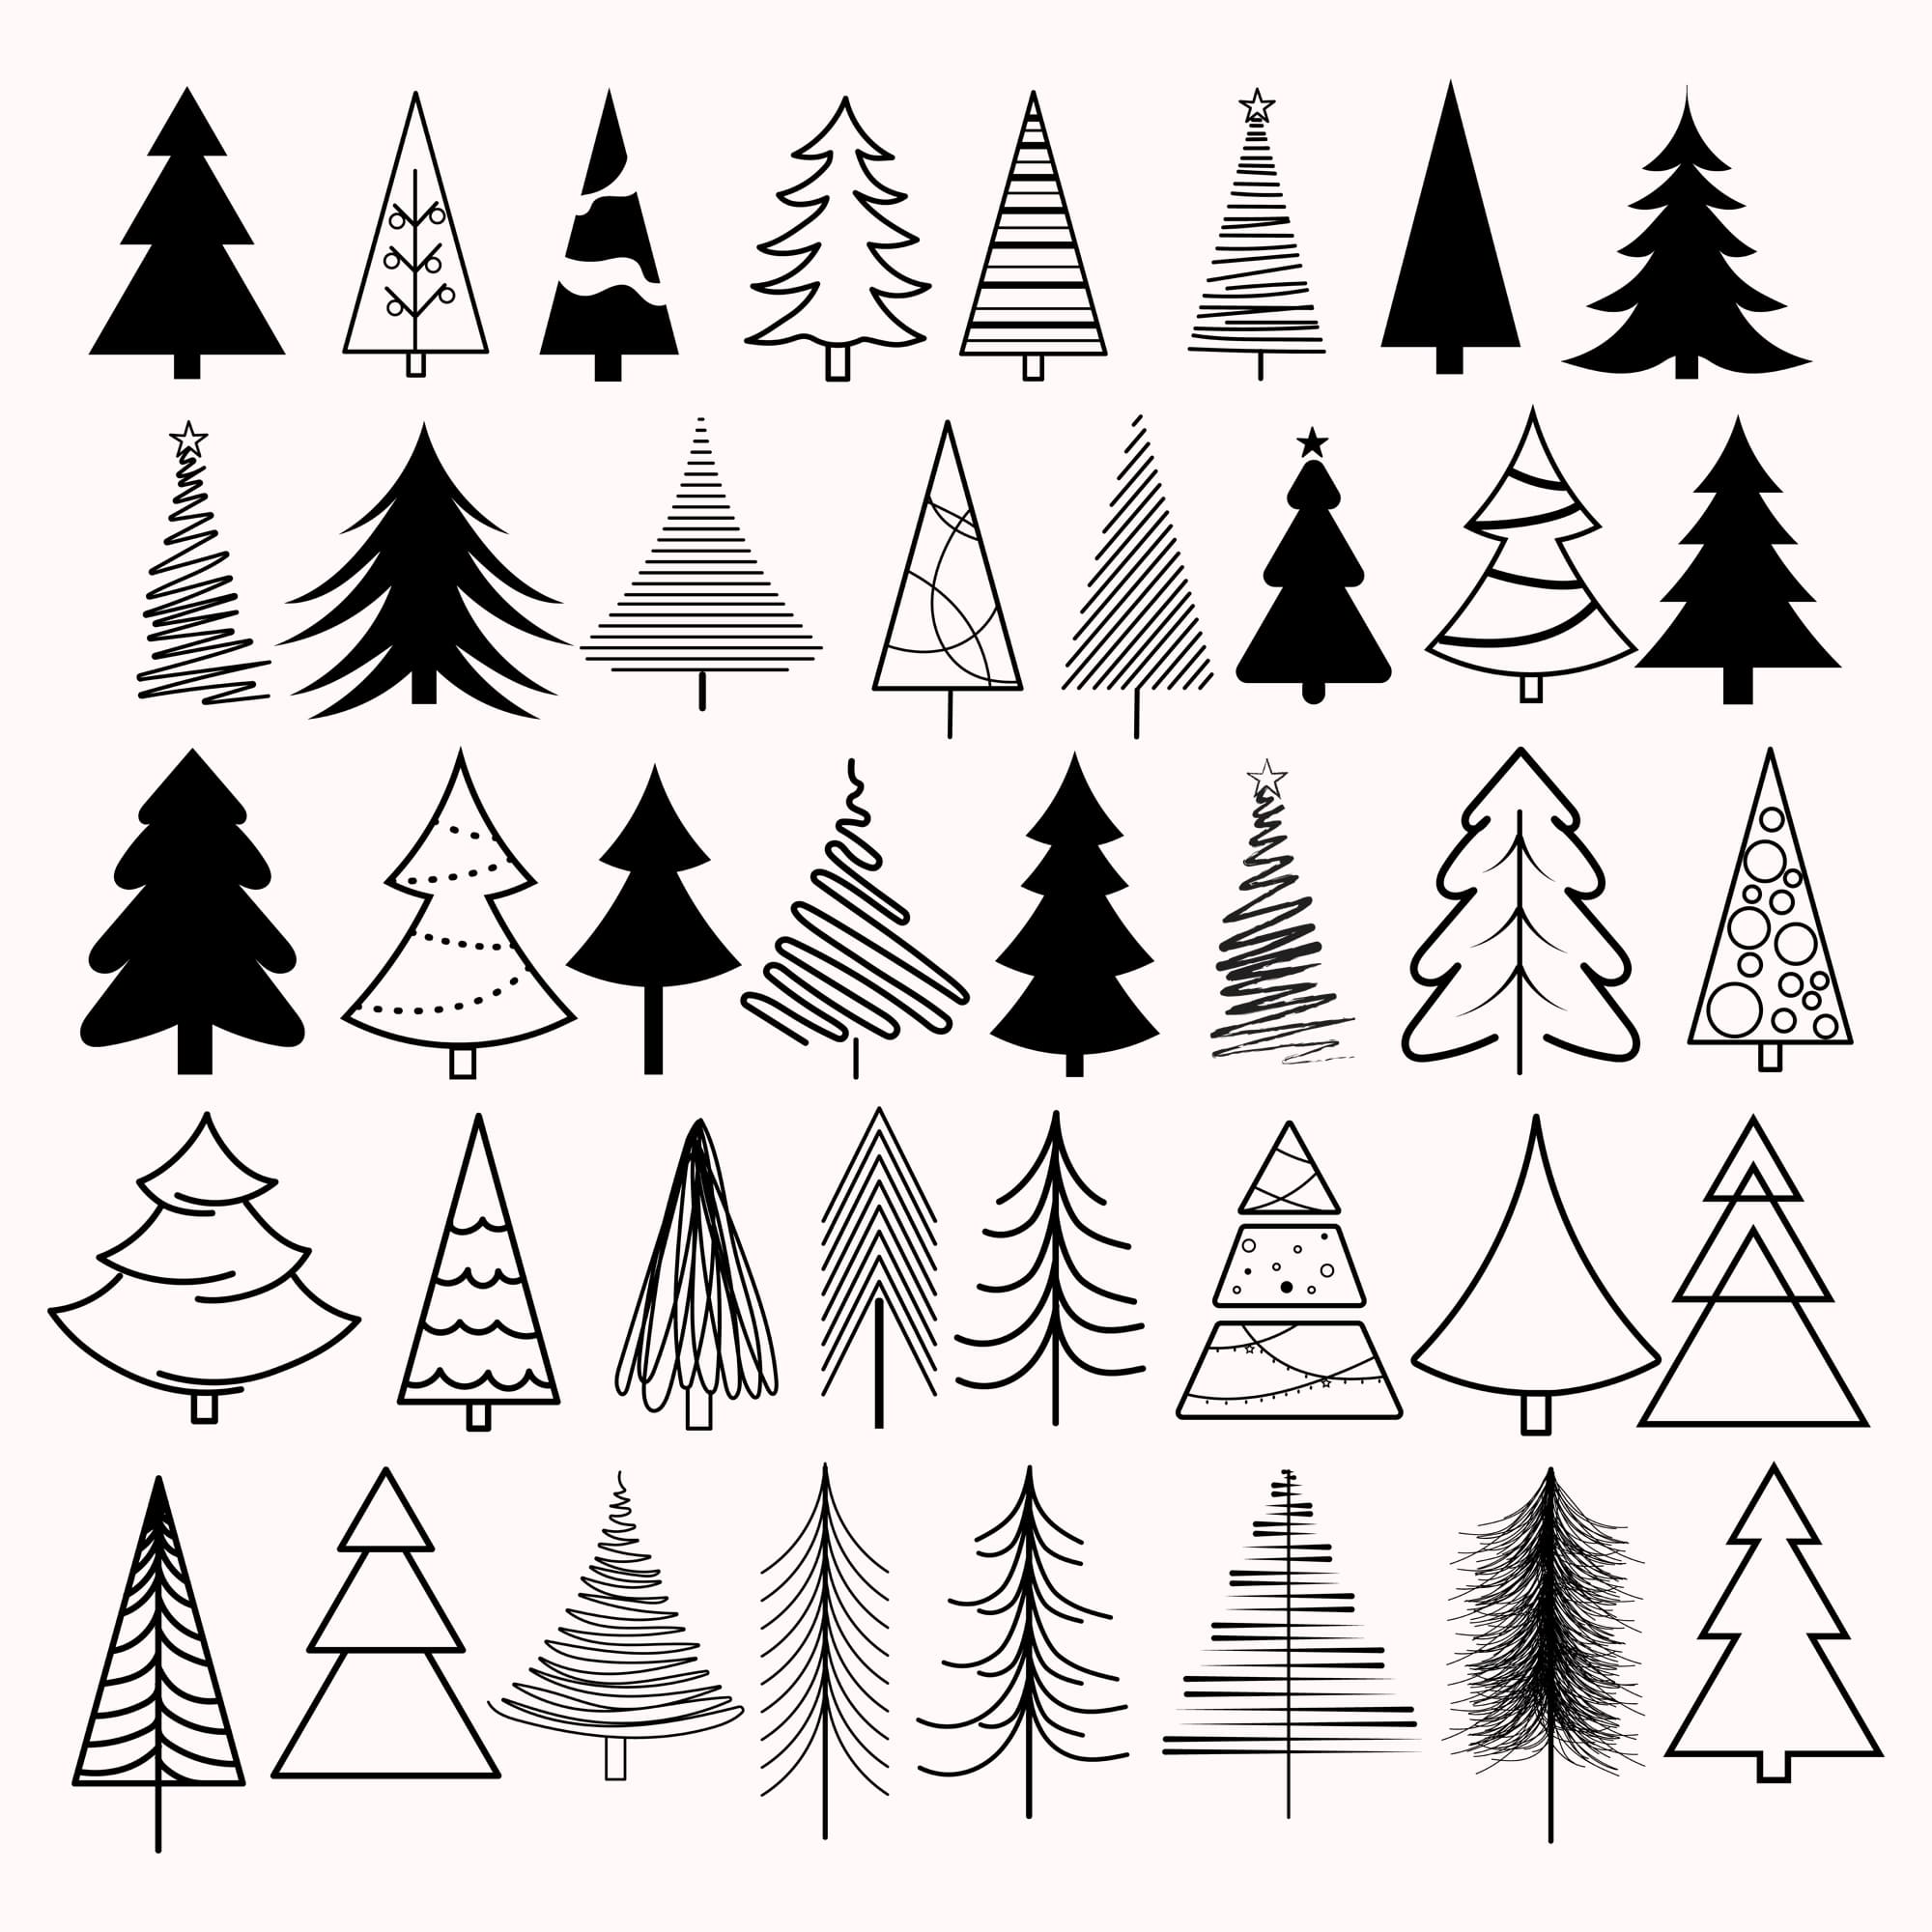 Christmas trees in outlined style.